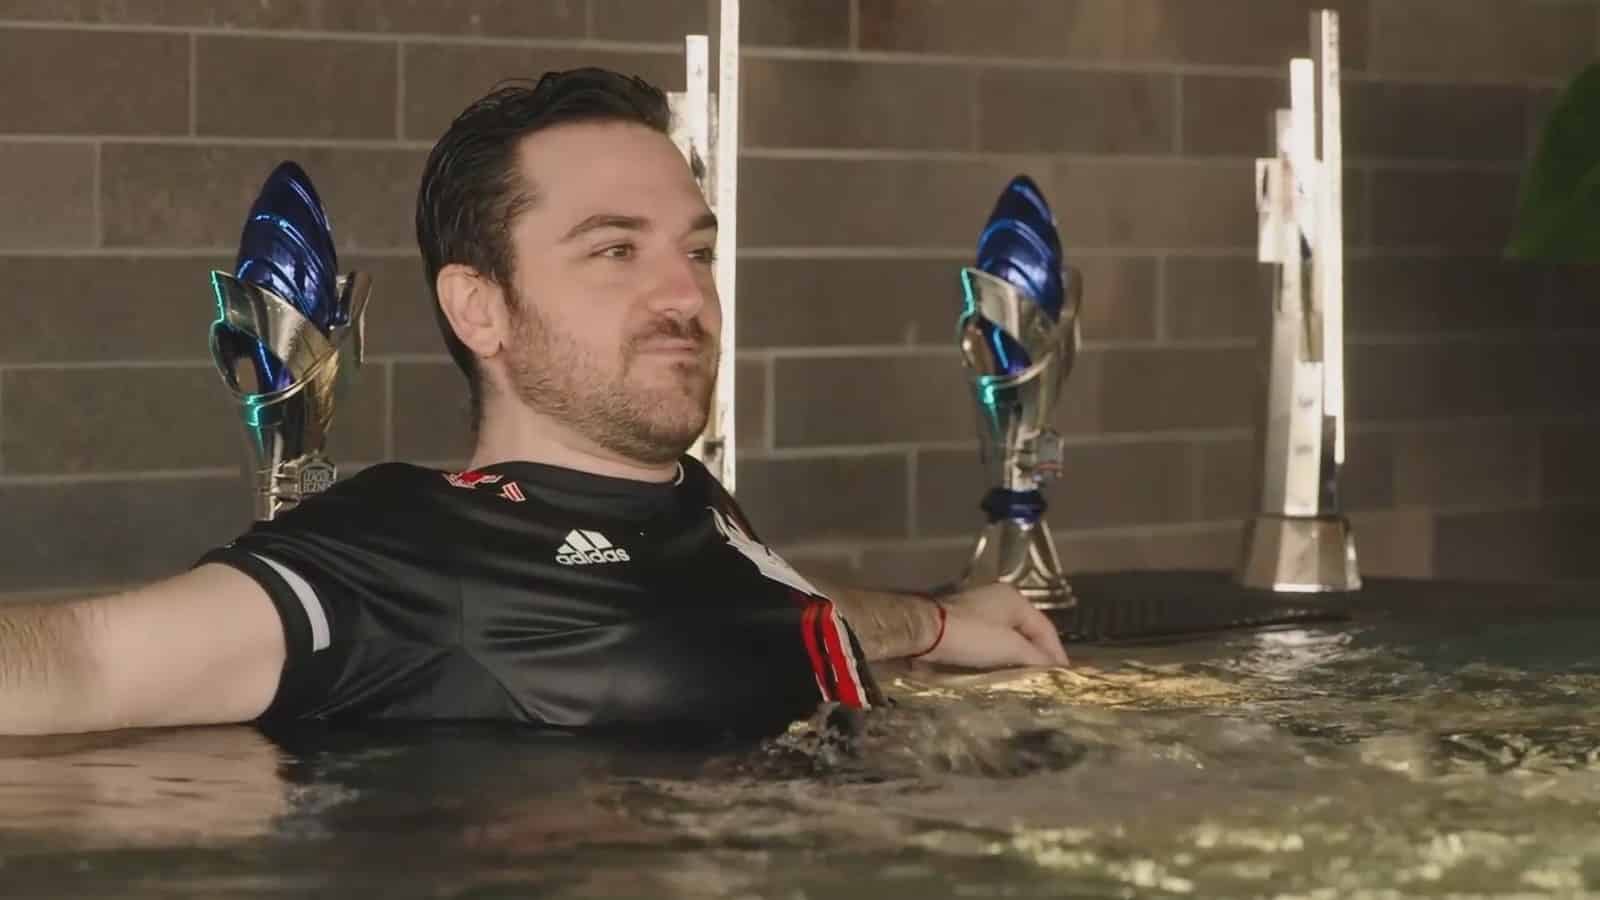 G2 Ocelote in hot tub on LEC Twitch stream